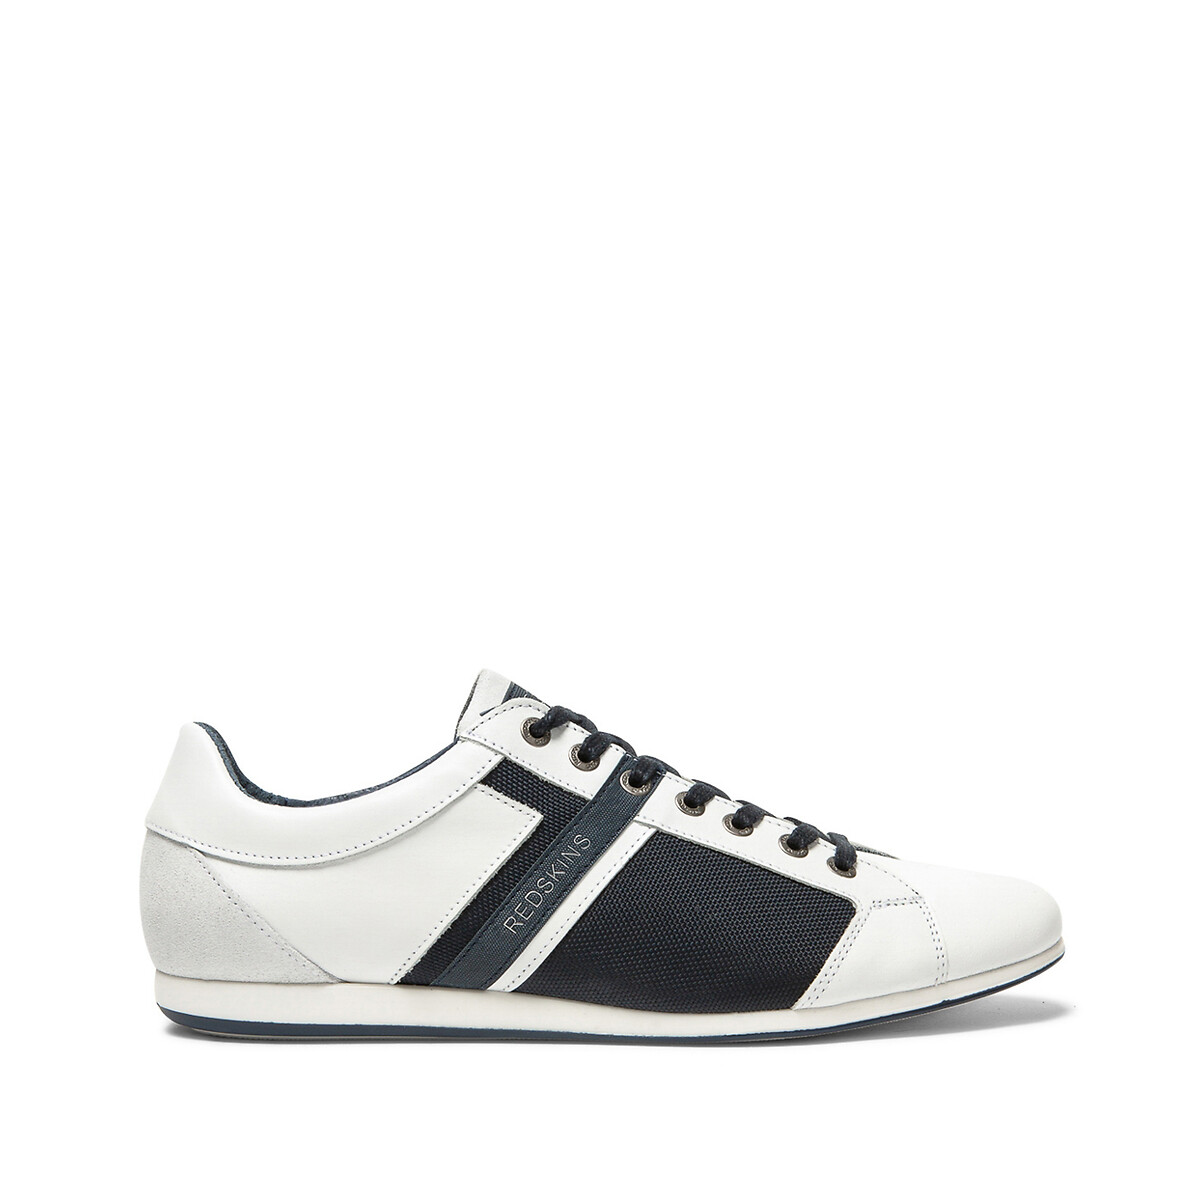 Waseko leather trainers, white/navy, Redskins | La Redoute